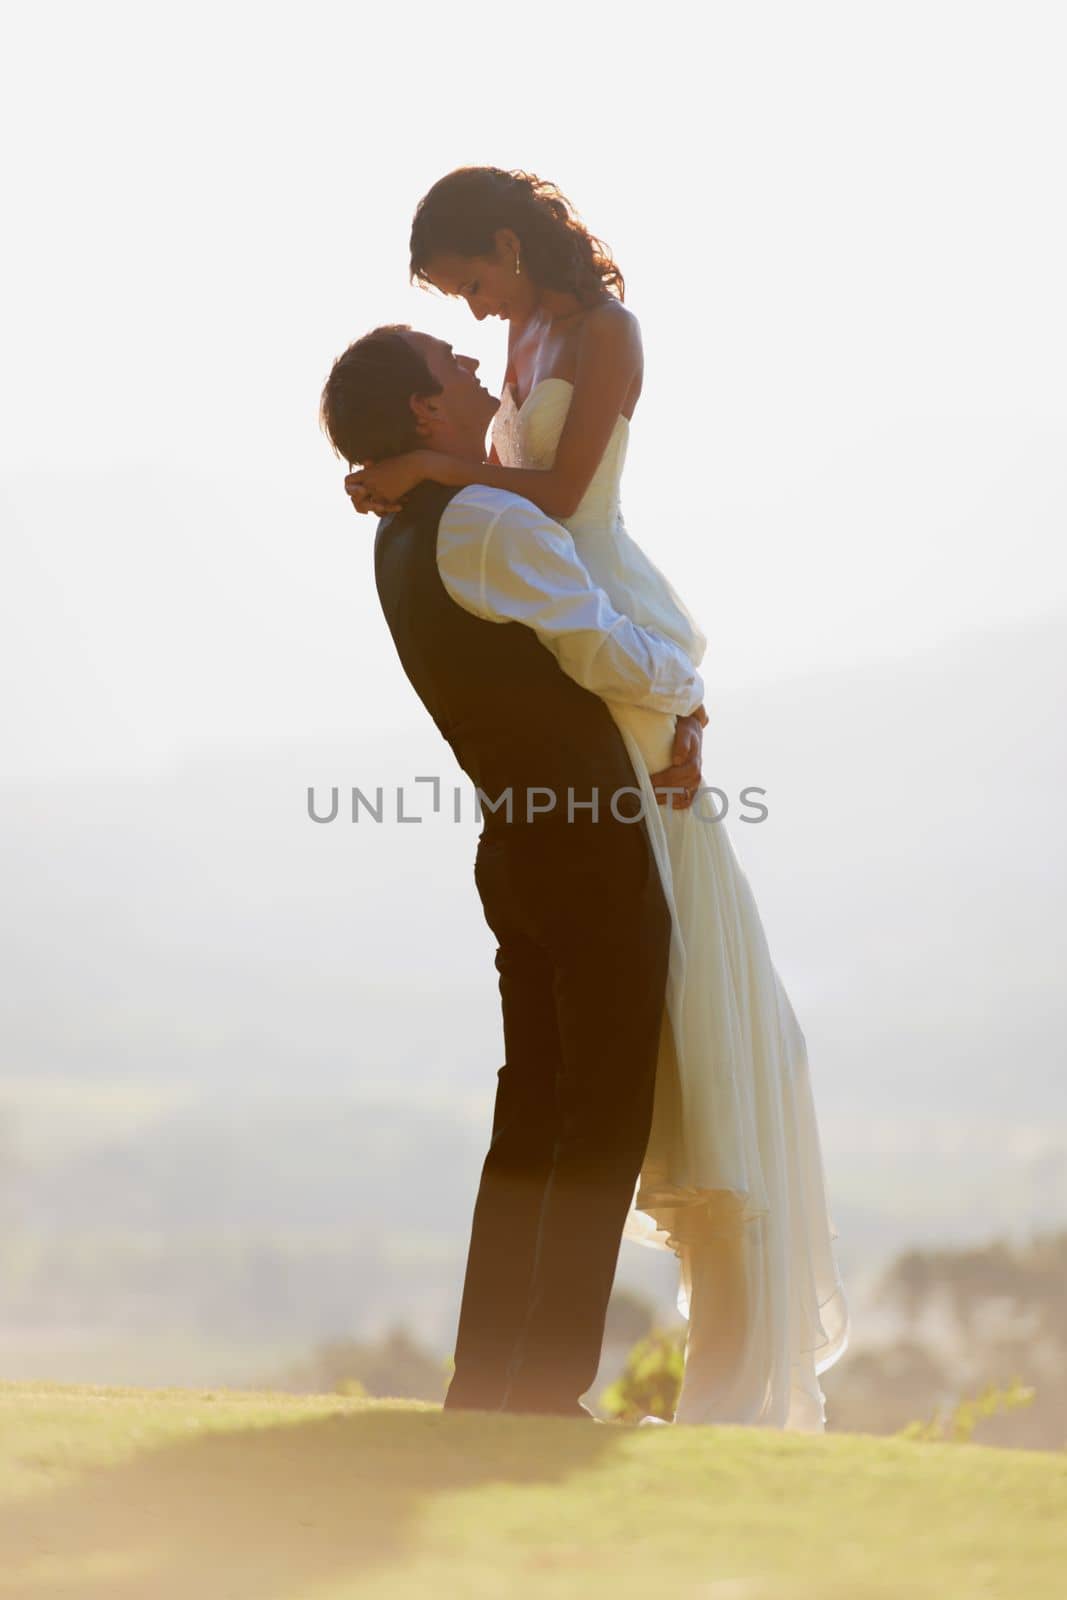 The first day of their lives together. A groom lifting his bride in the air